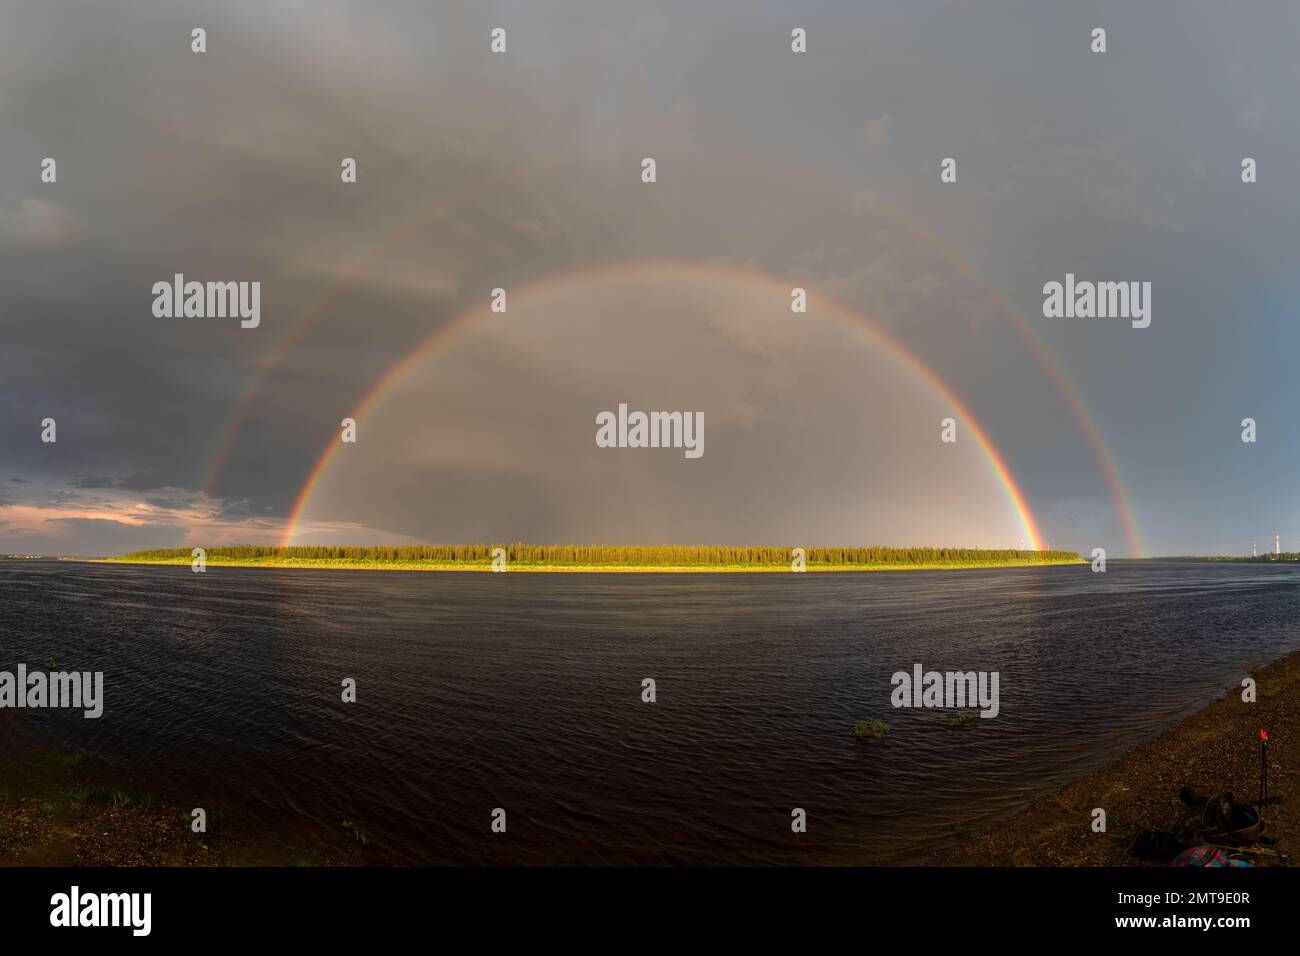 A panorama of a double rainbow against the backdrop of a bright sky emerges from the pylons of power lines and illuminated by the forest on the banks Stock Photo